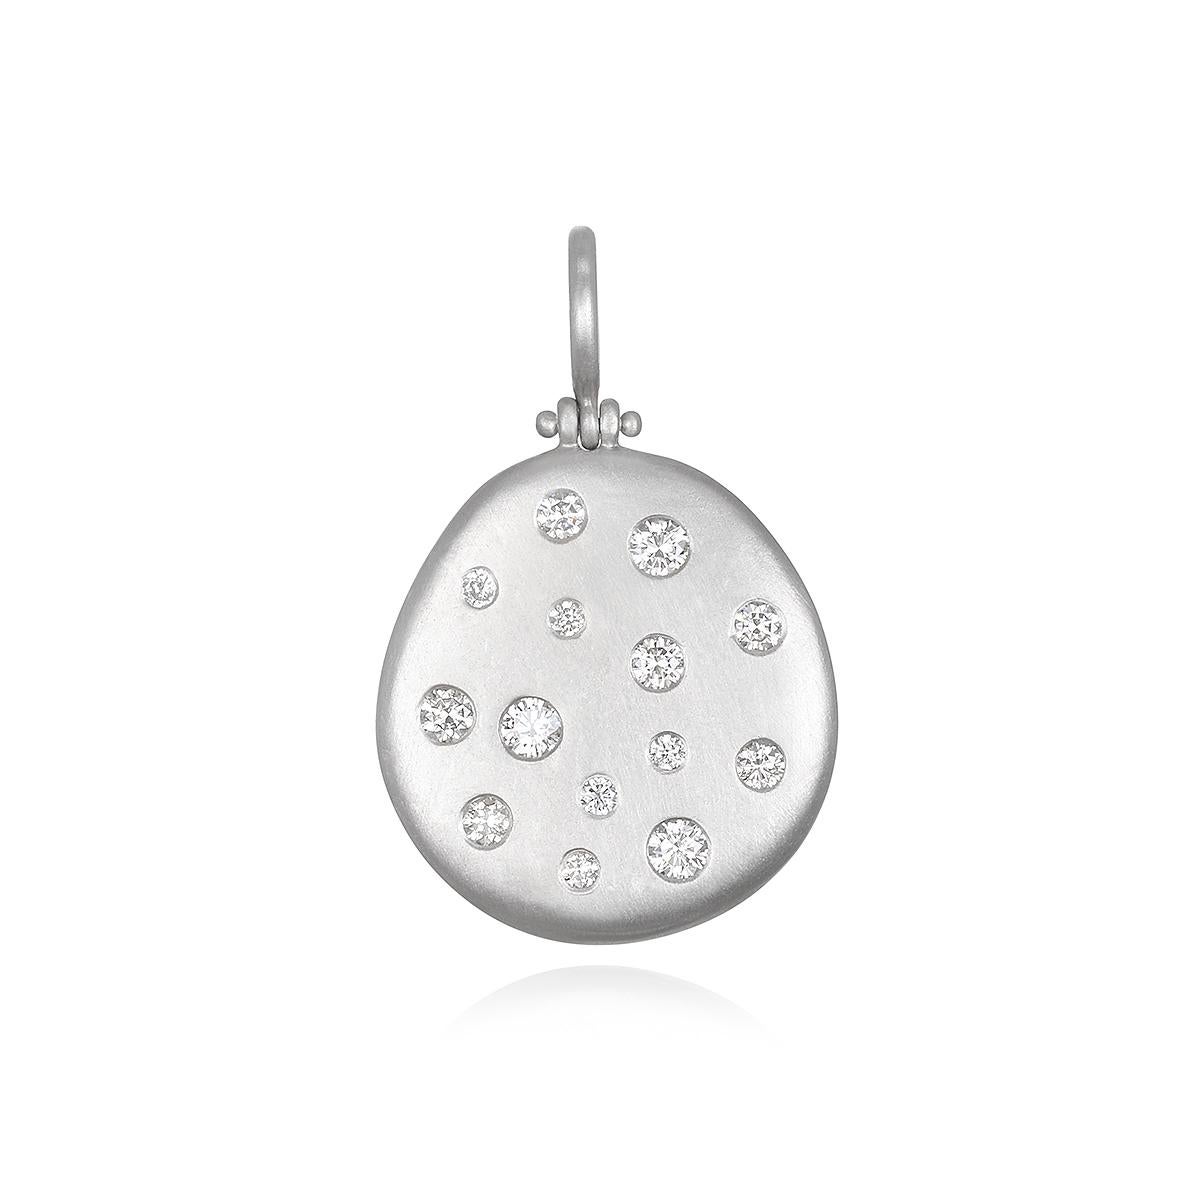 Versatile and easy to wear, Faye Kim's Platinum Diamond Hinged Dog Tag Necklace is perfect for every day. The pendant, which can be engraved and which shimmers and sparkles with its diamonds, is matte-finished in platinum and hangs on an 18 karat